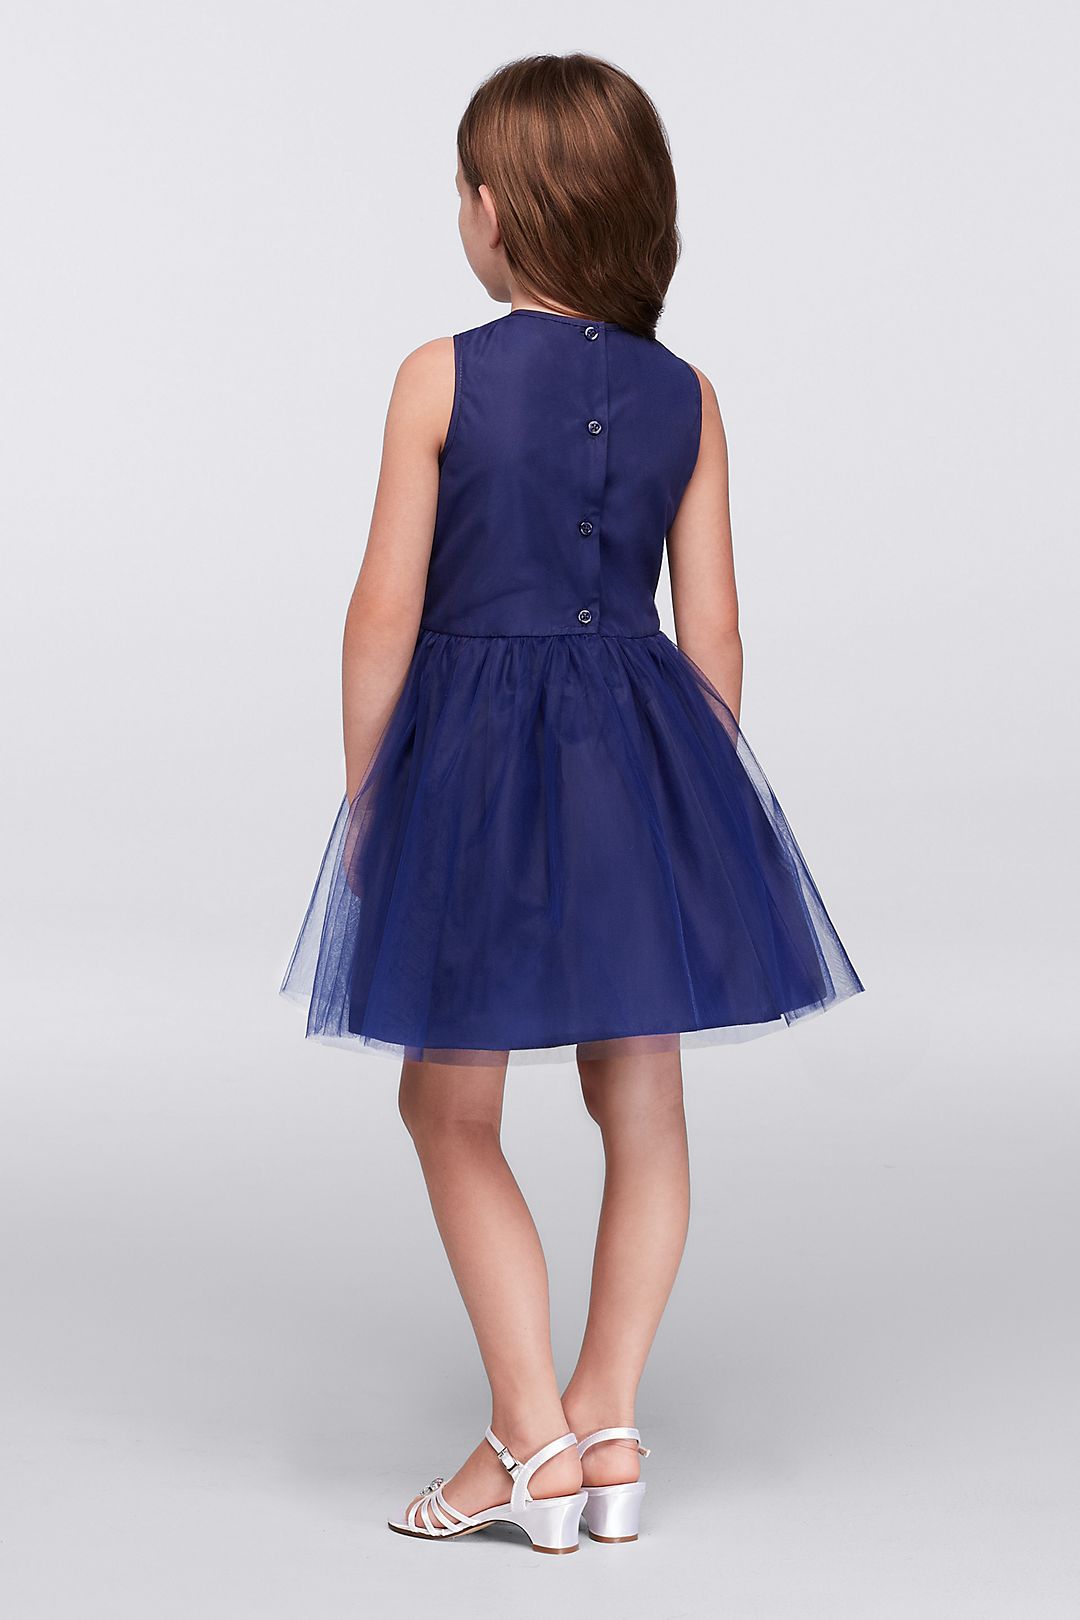 Sequin and Tulle Party Dress with Flower Applique Image 2